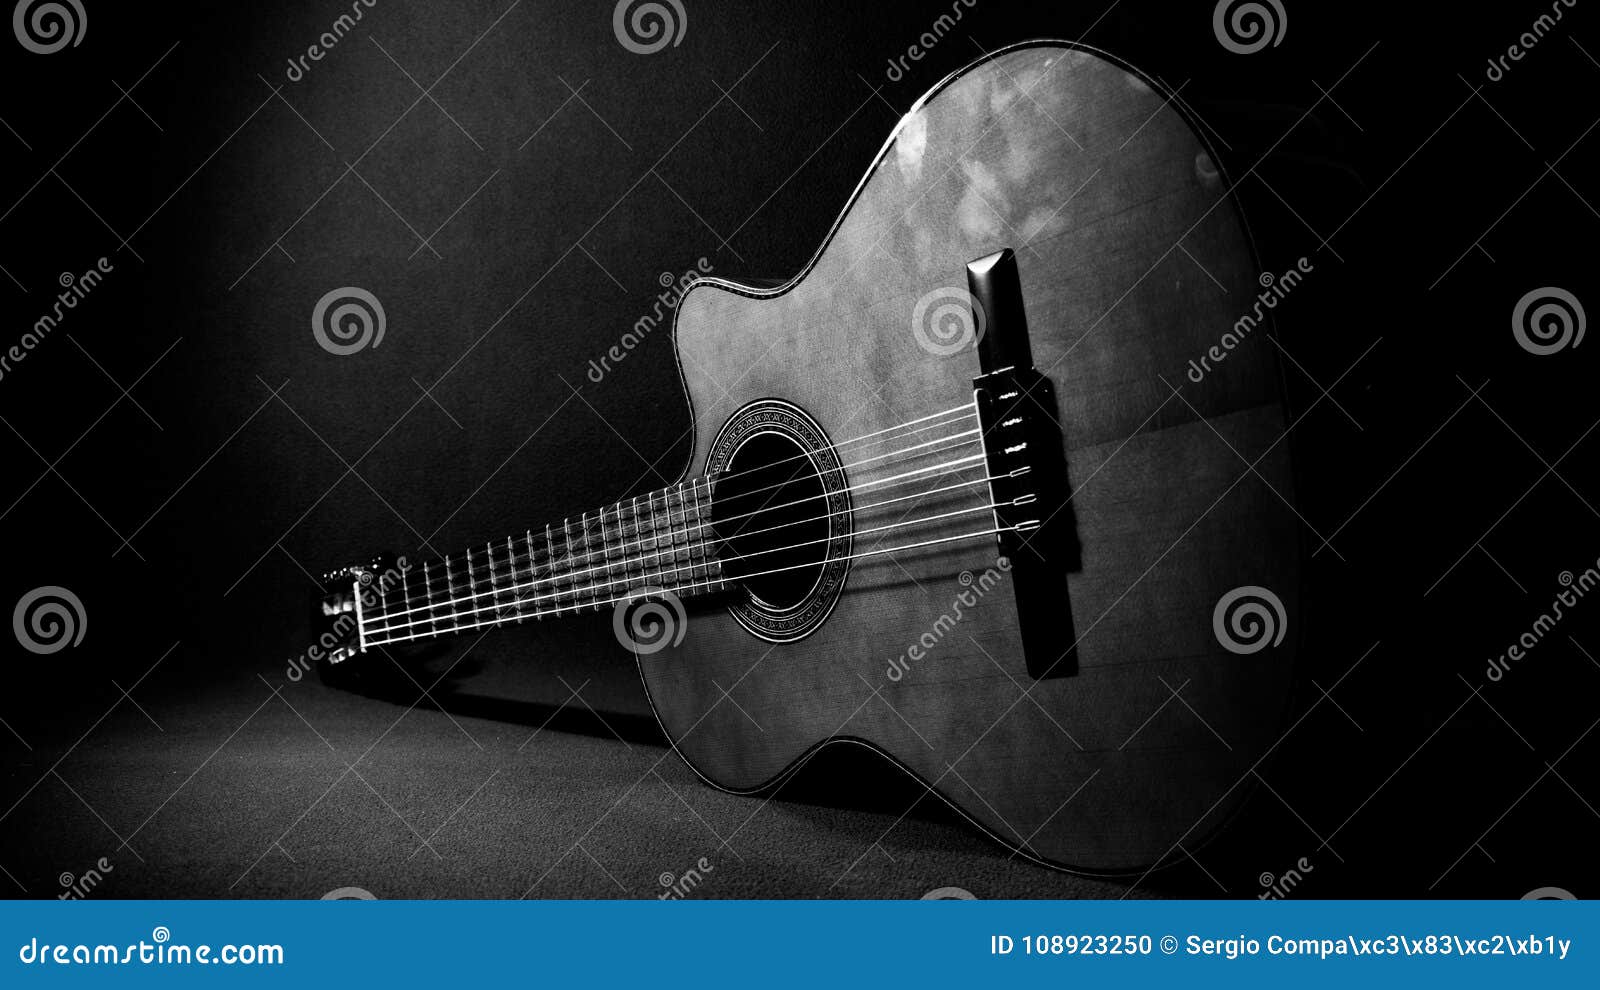 acoustic guitar resting on the floor